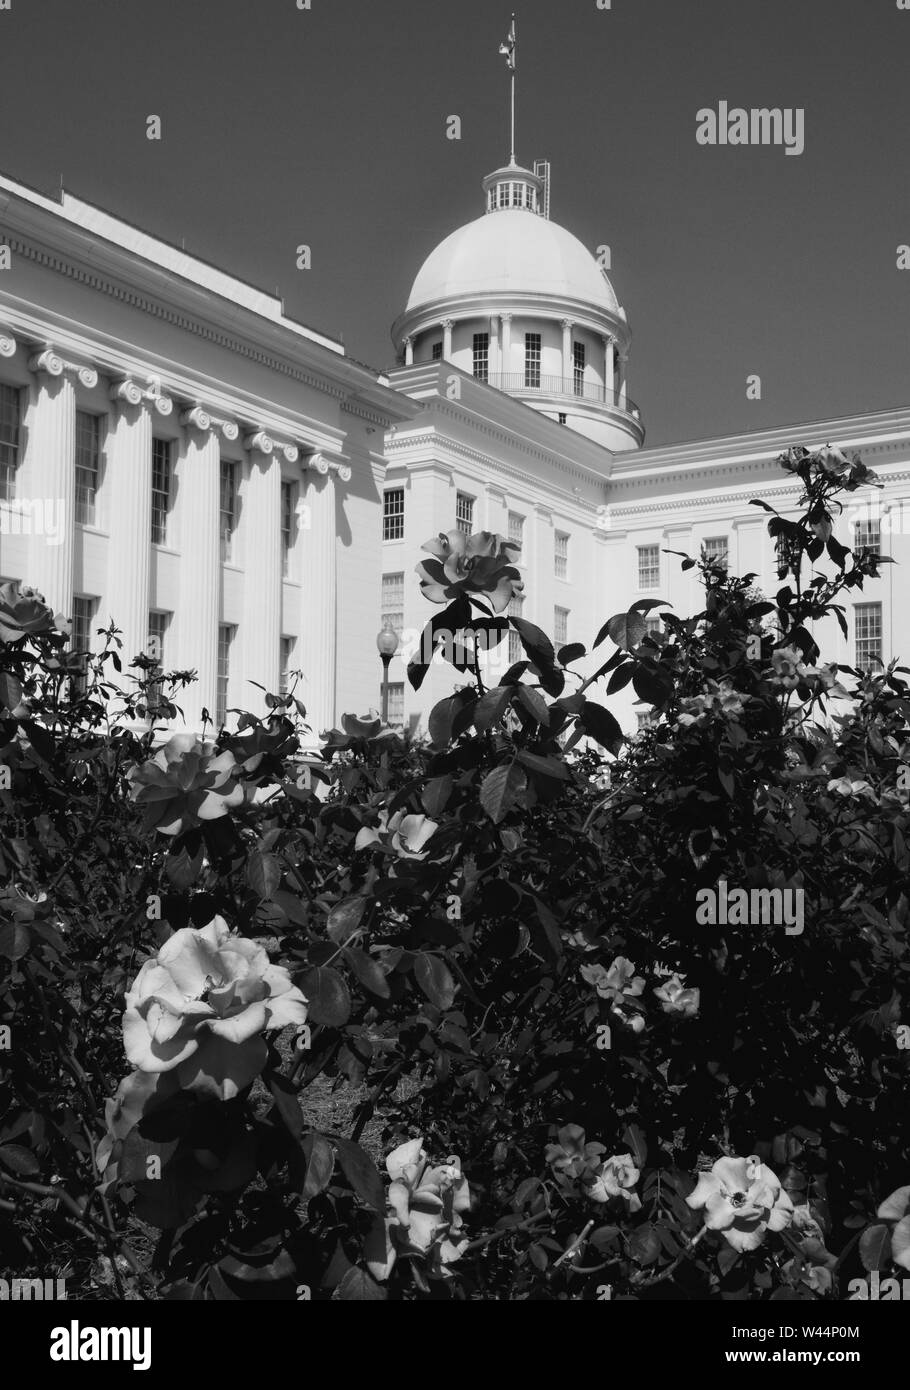 Roses in the foreground of the domed and historical Alabama State capitol building in Montgomery, AL, on a summers day in black and white Stock Photo